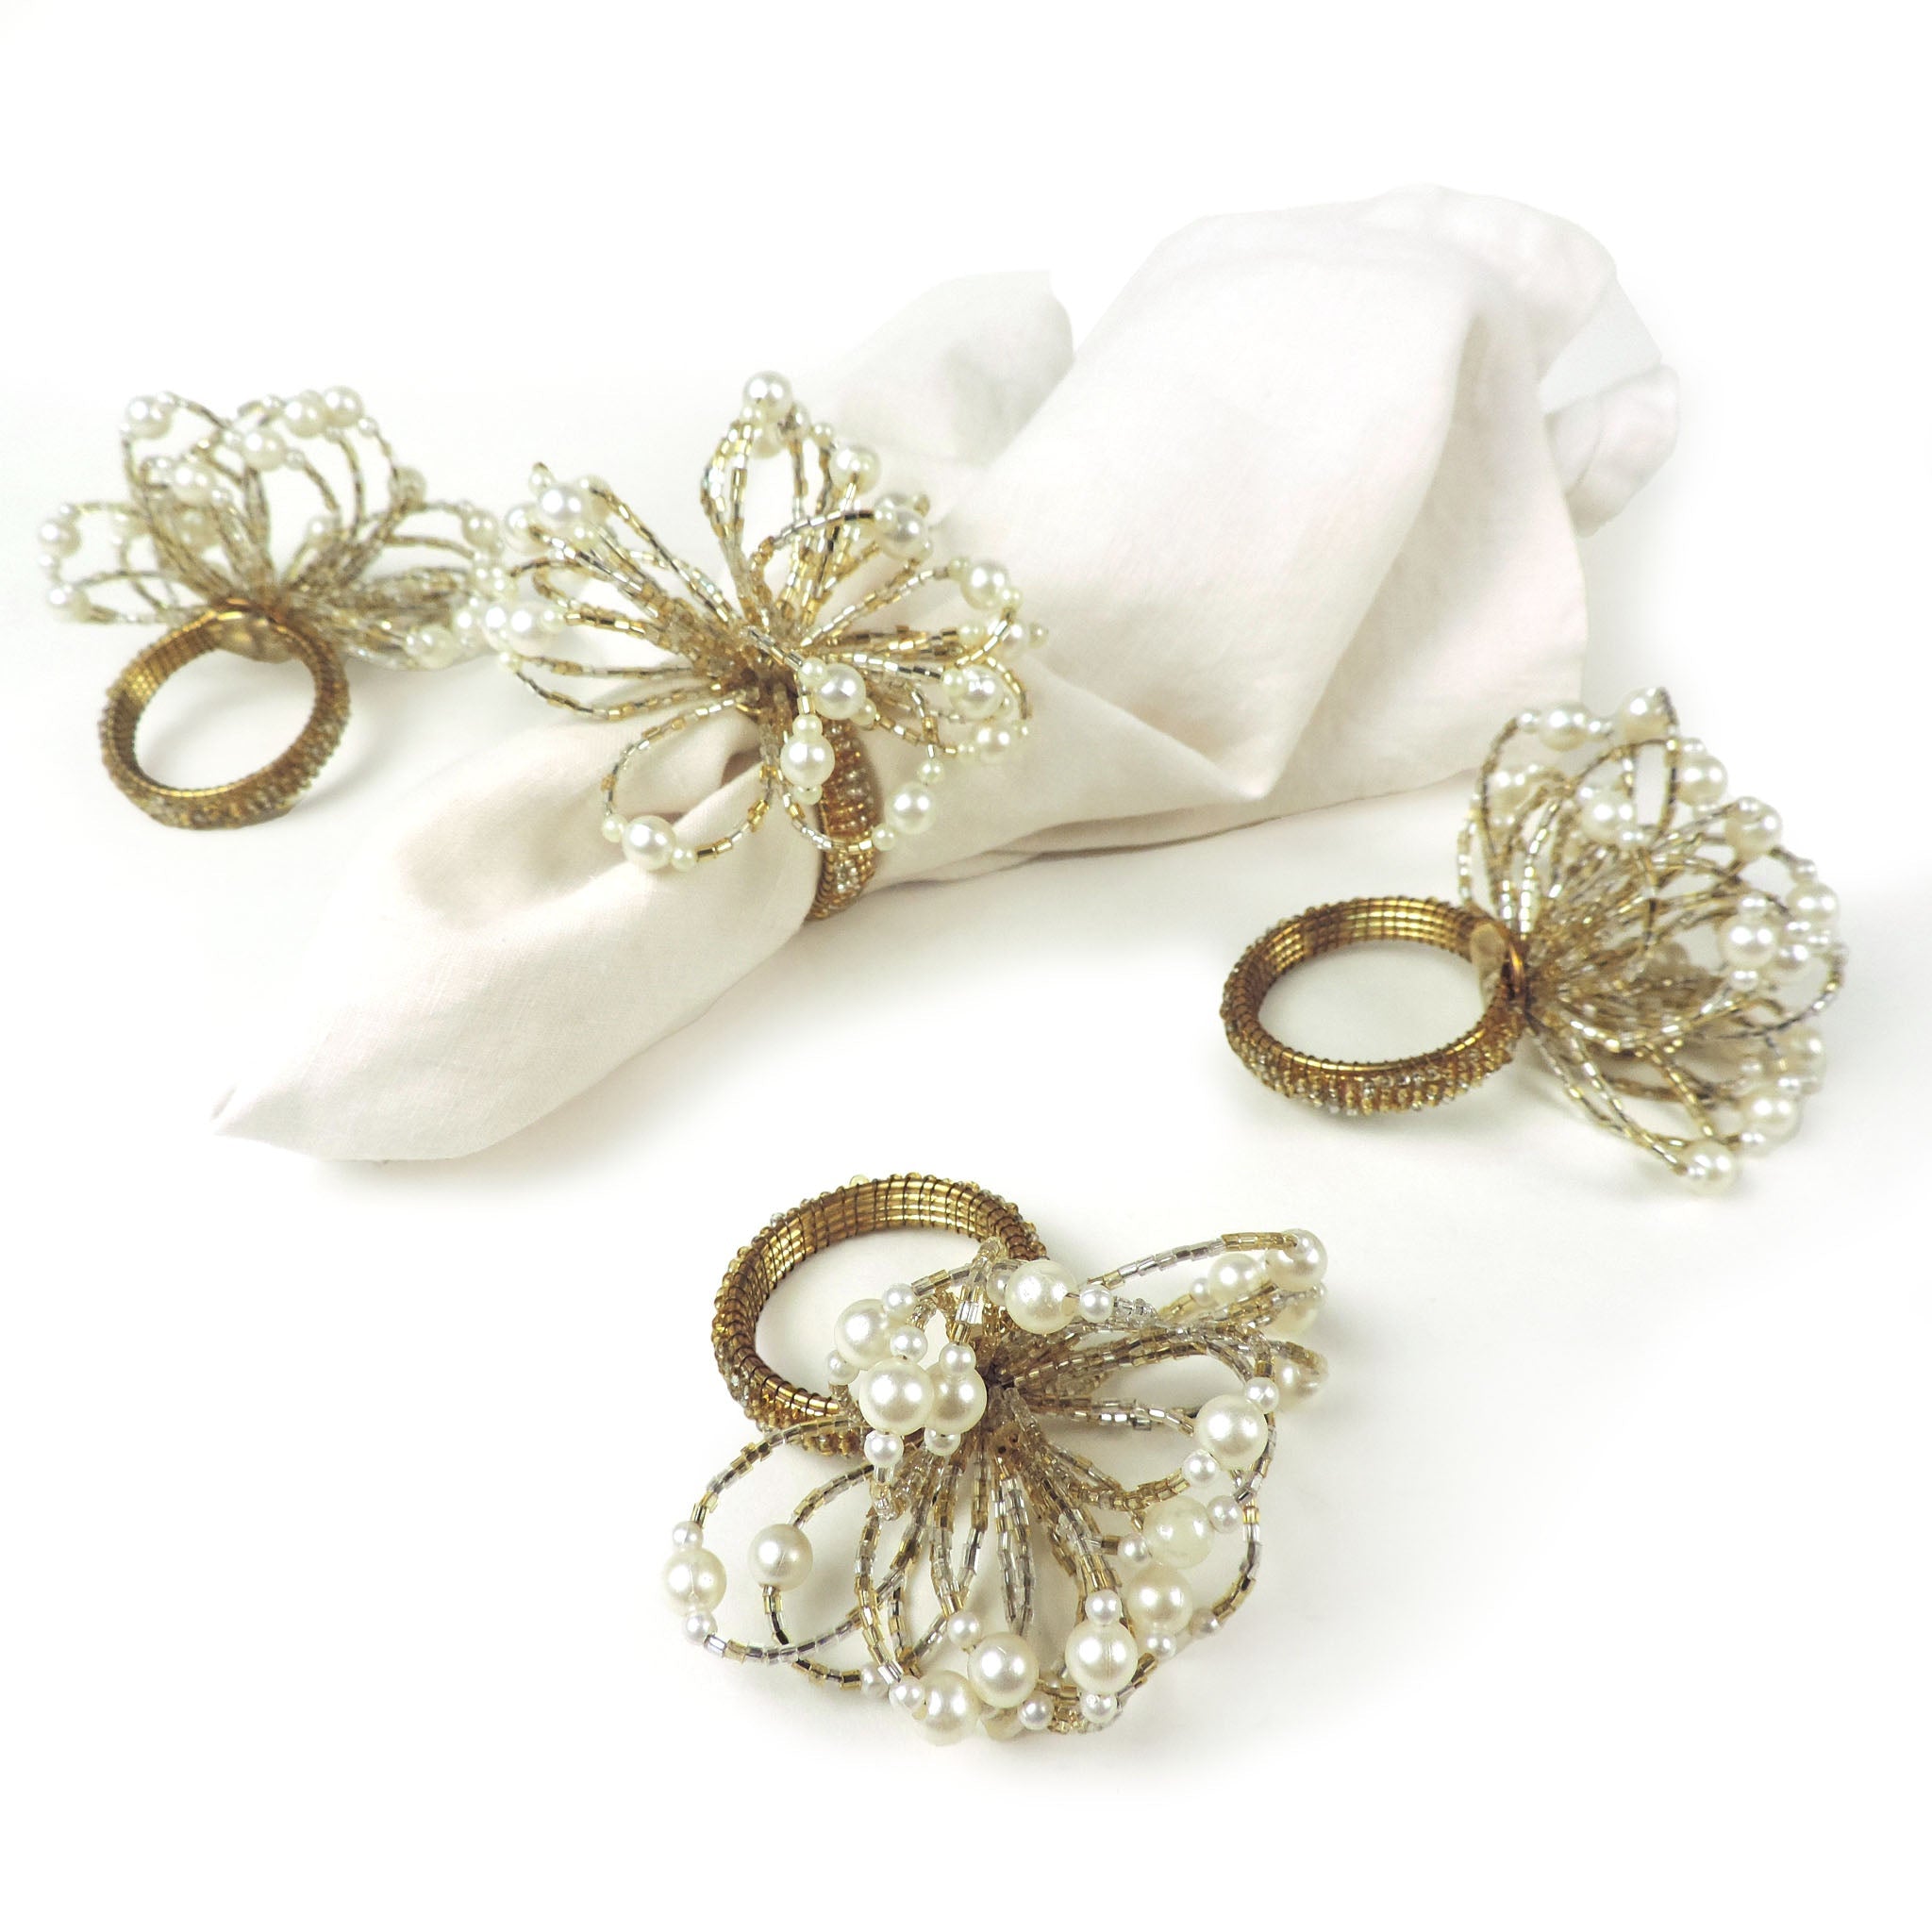 Pearl Flower Napkin Ring in Gold, Set of 4